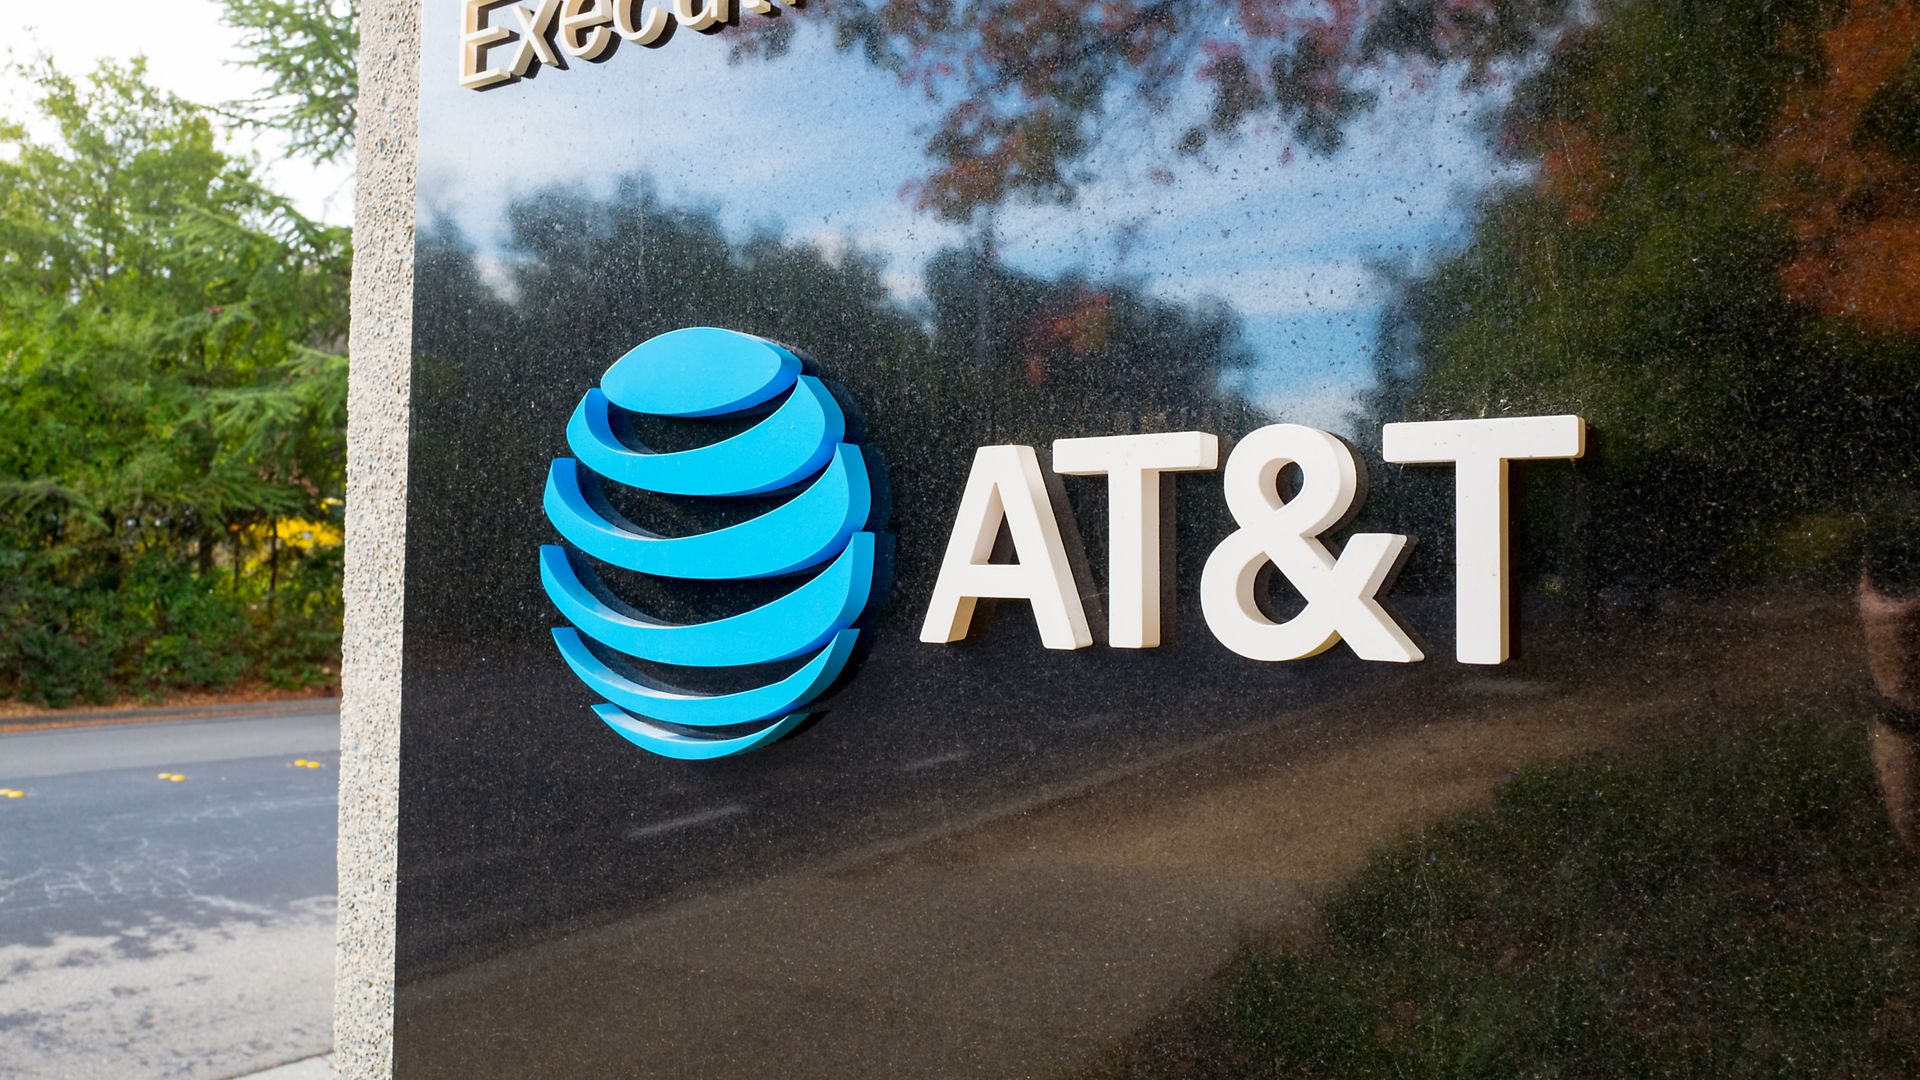 A sign with AT&T's logo